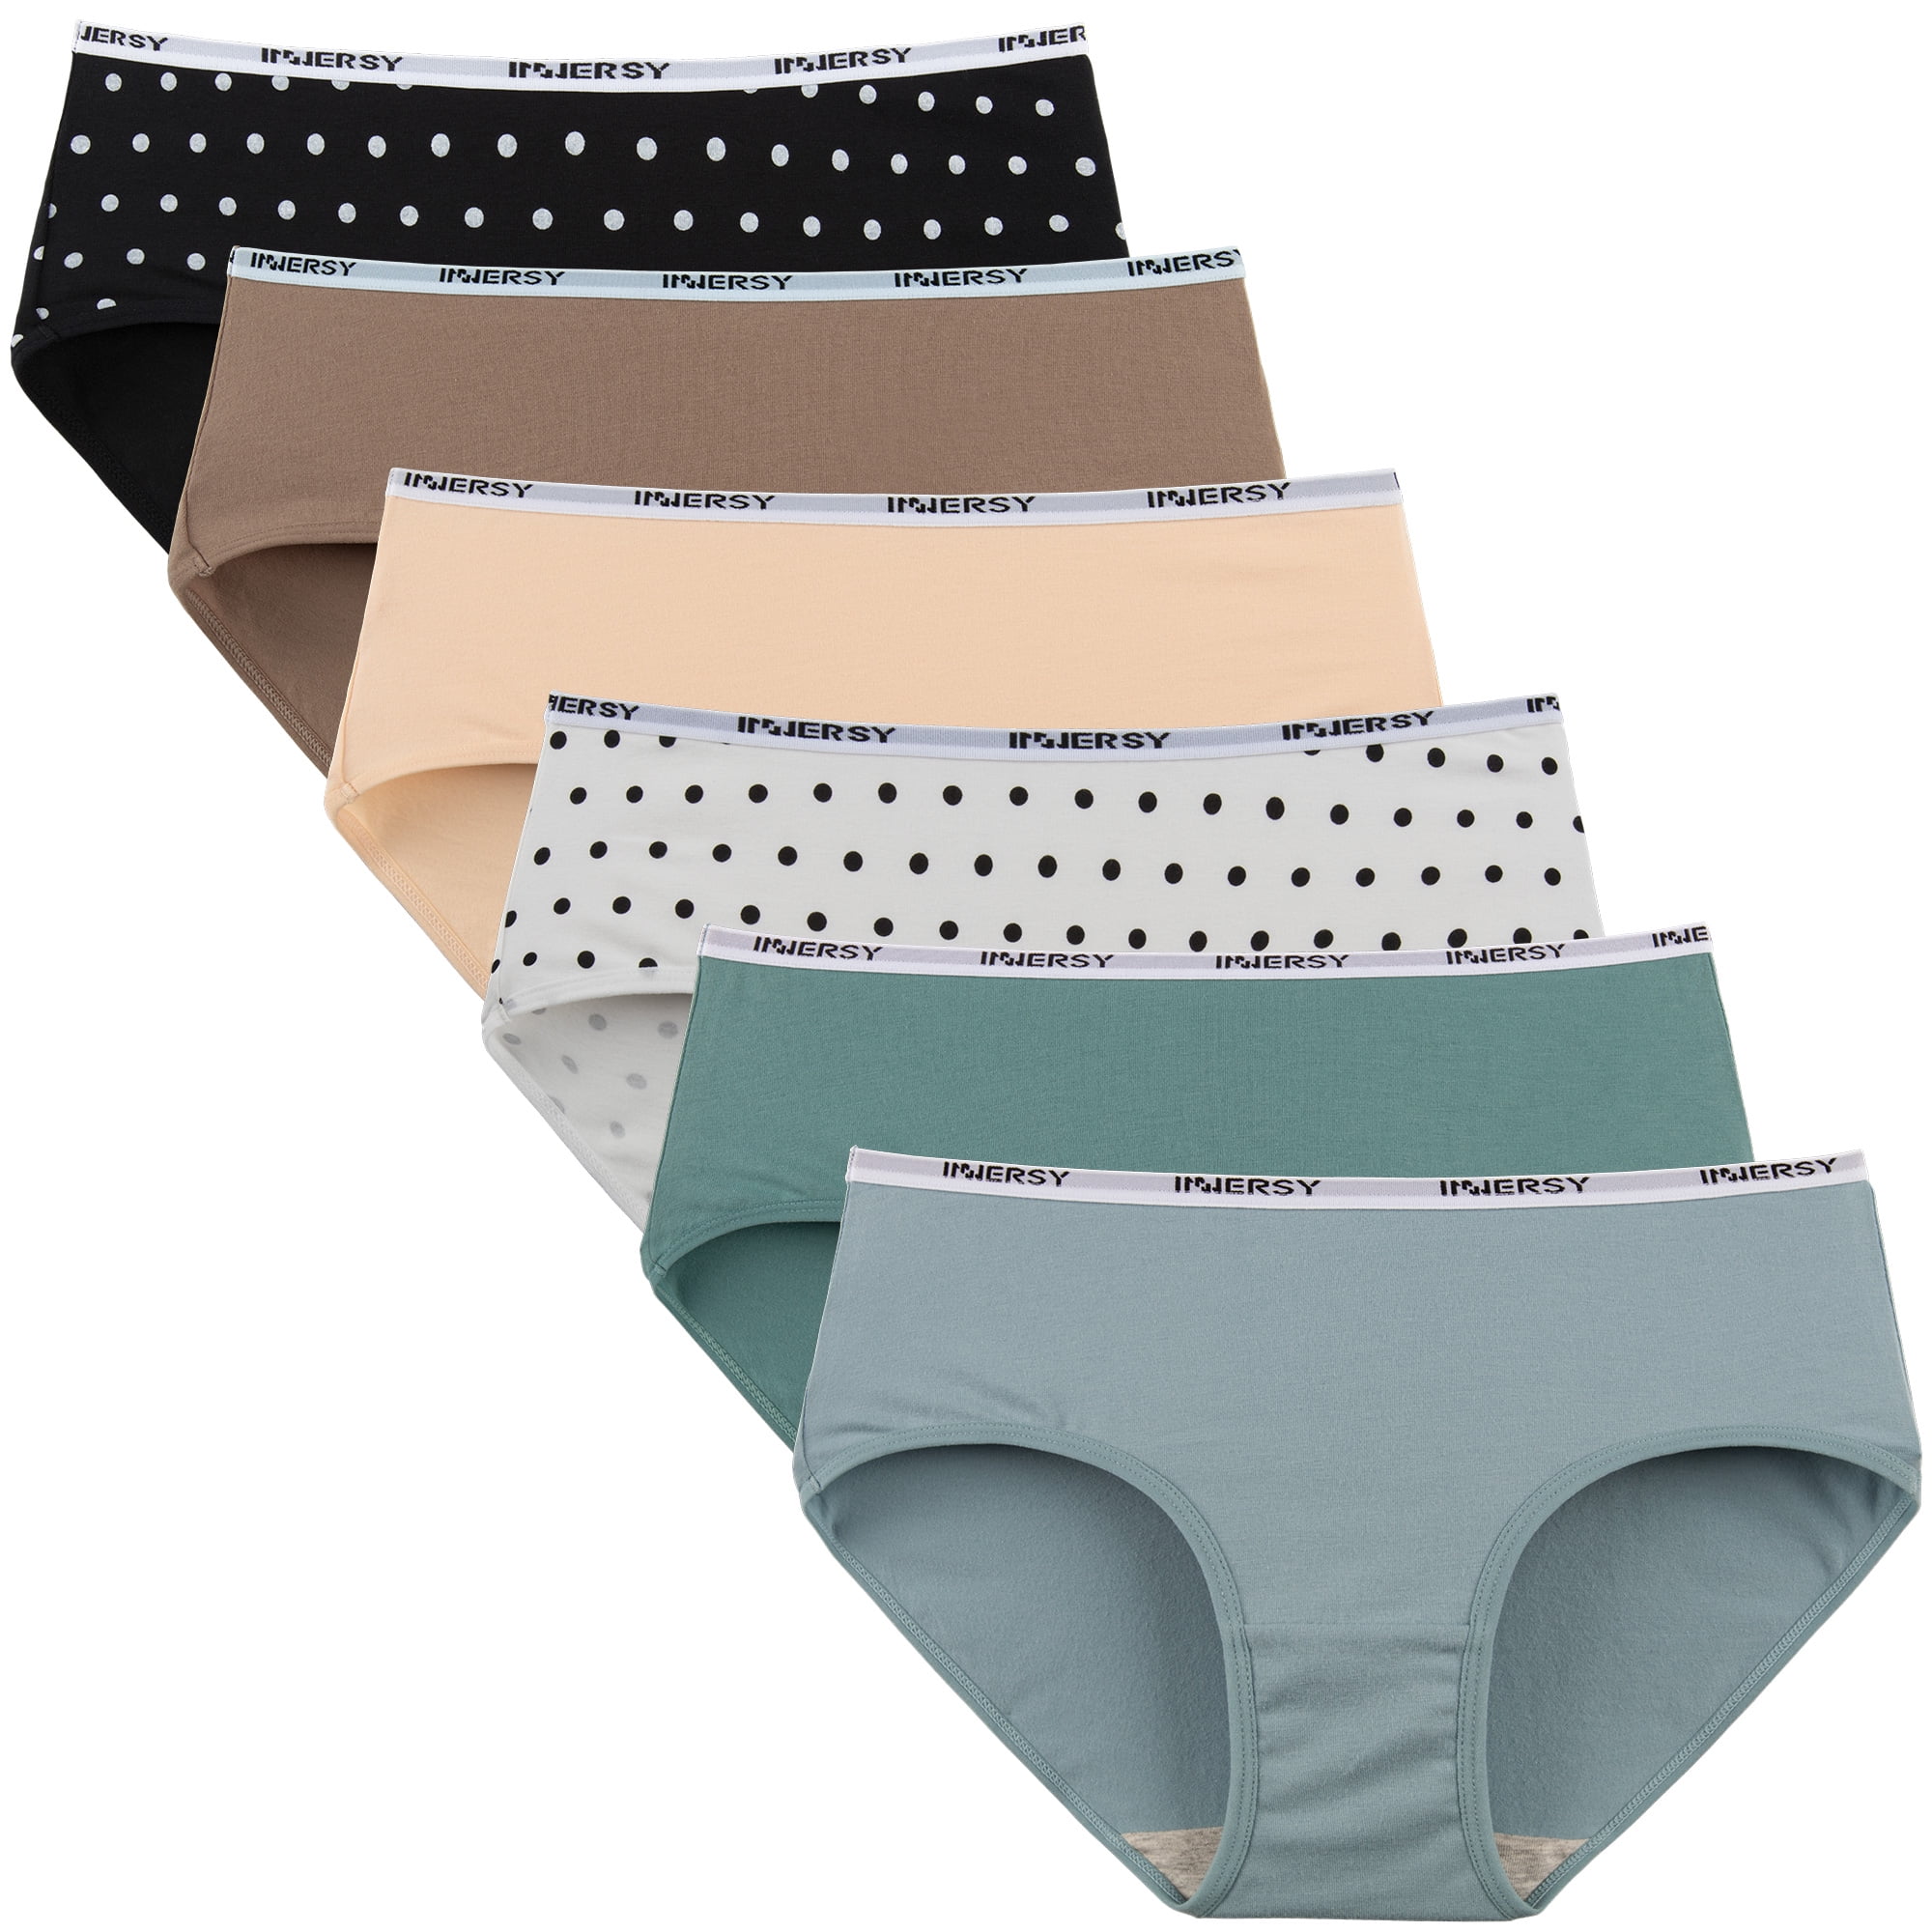 INNERSY Womens Underwear Cotton Hipster Panties Low Rise Basics Underwear  Set 6-Pack (Large, Black/Gray/Stripes) 